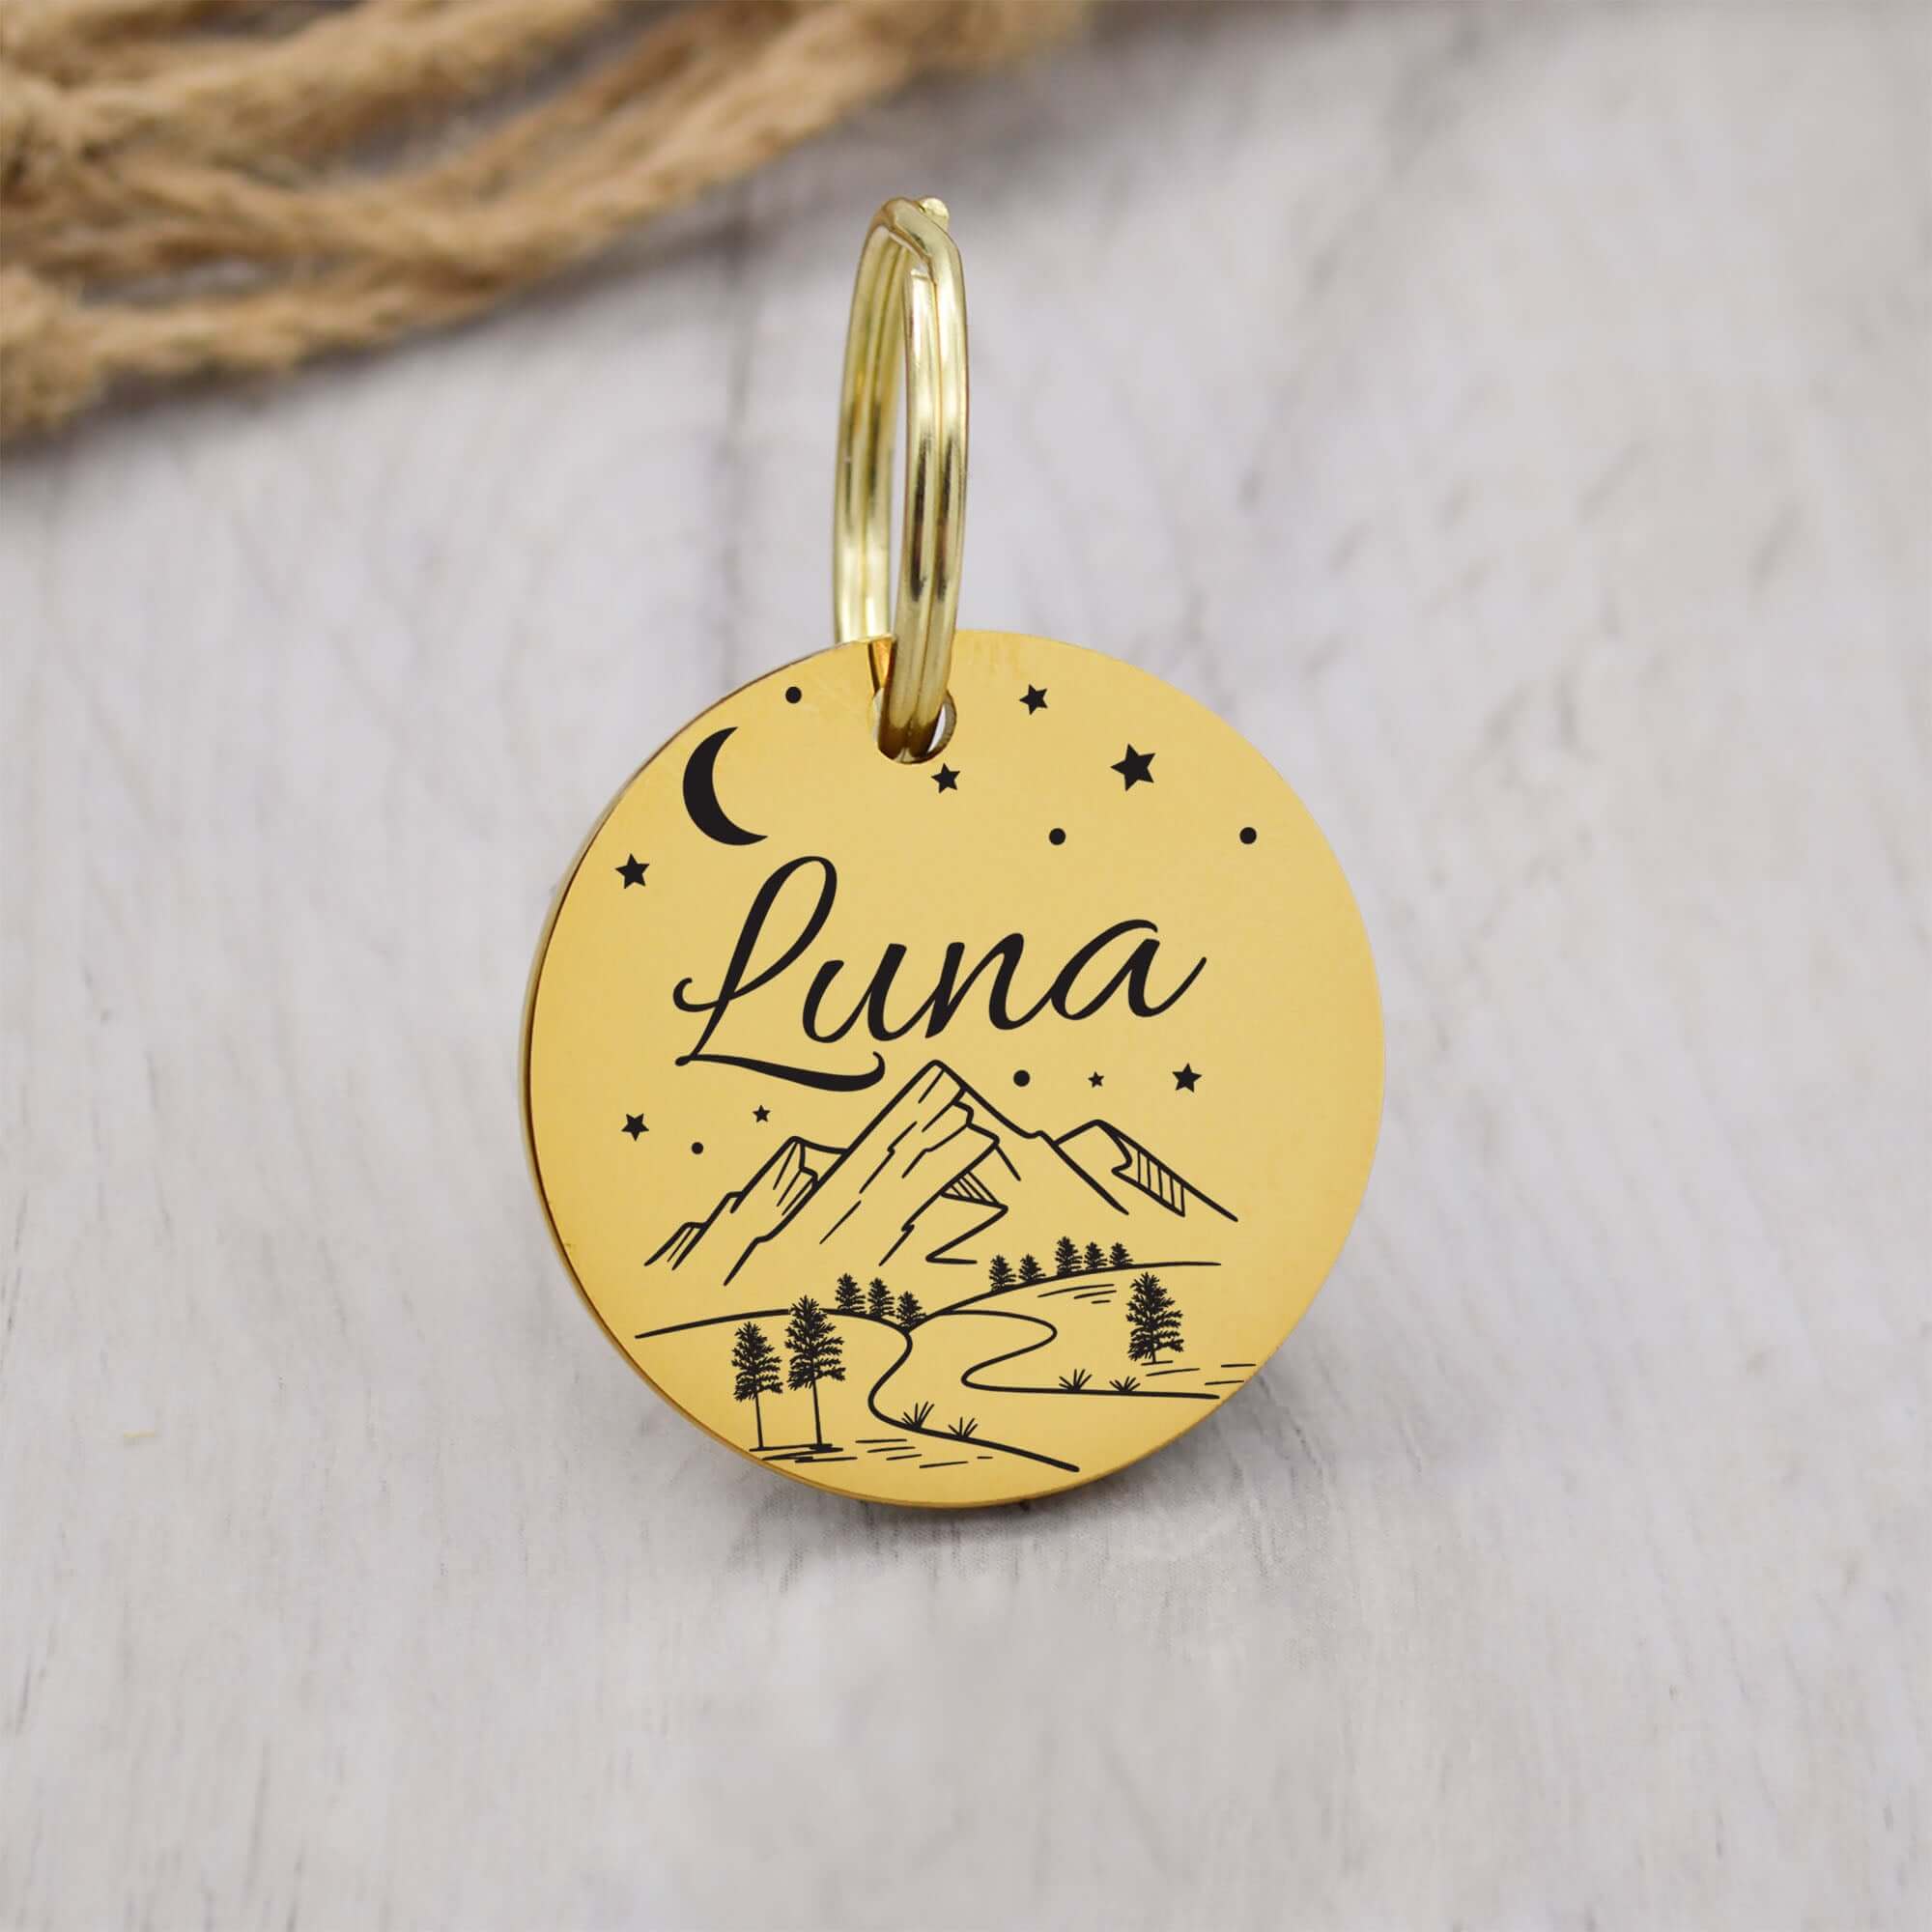 Engraved Pet Tags | Tag4MyPet